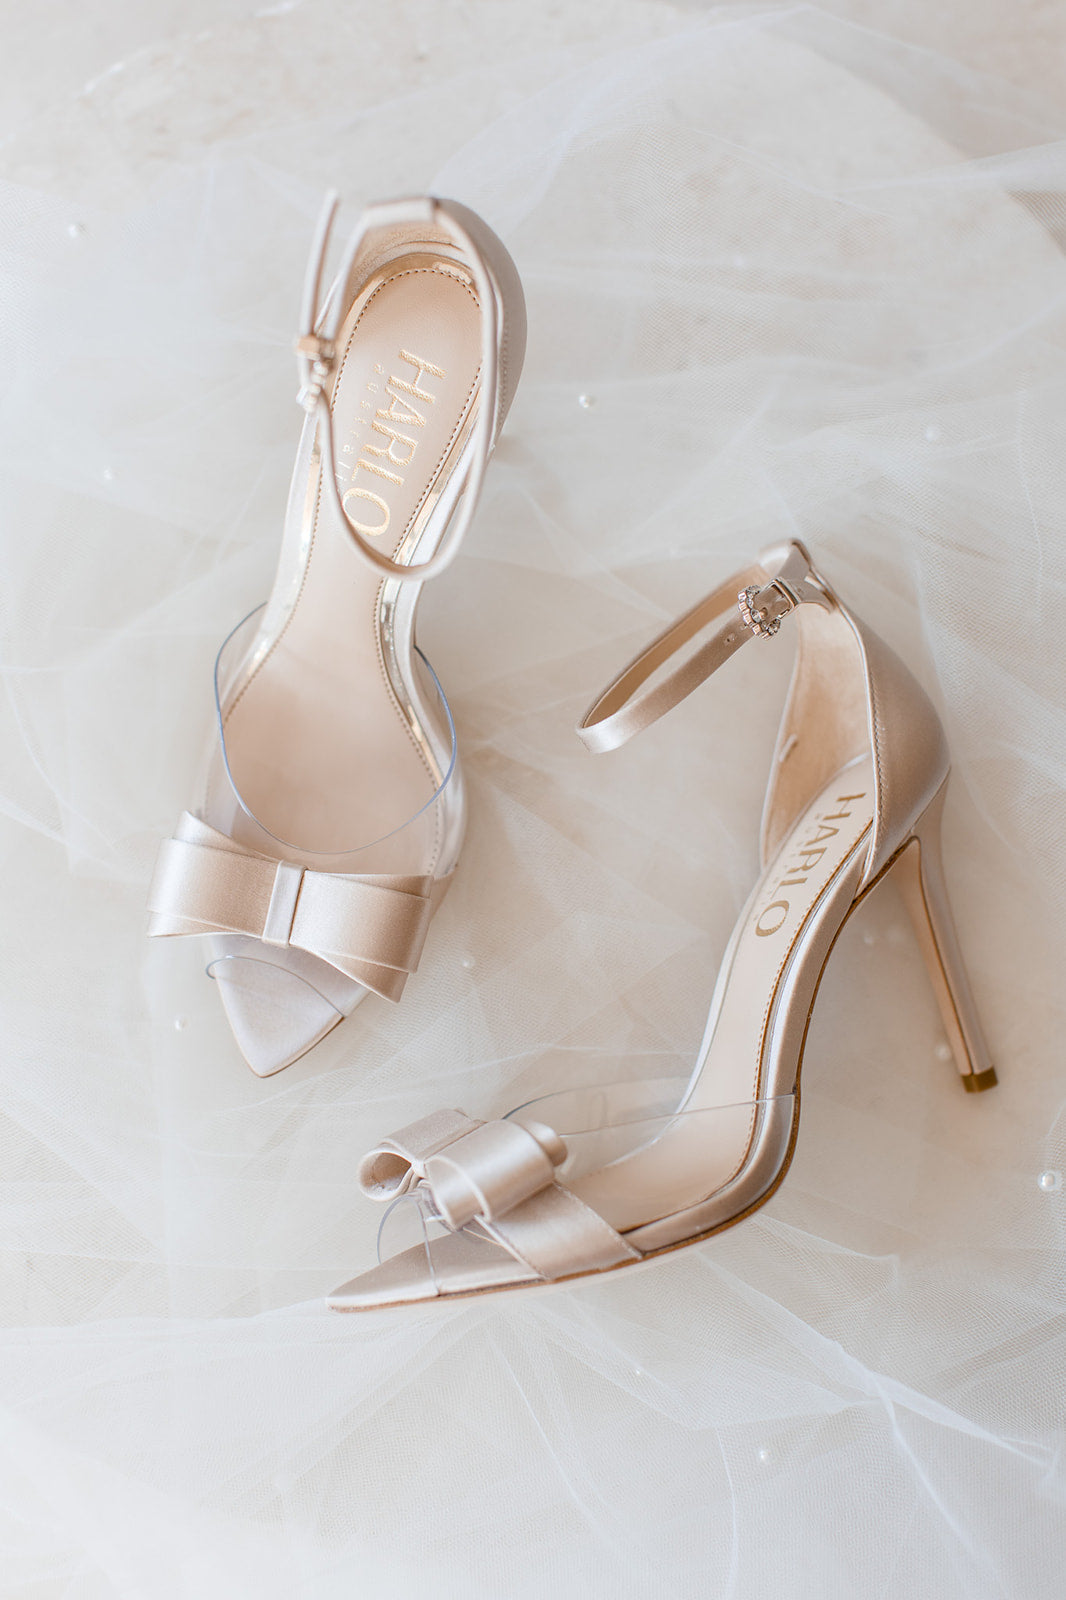 Nude Wedding Shoes - Comprehensive Range of Nude Shoes for Brides | The ...